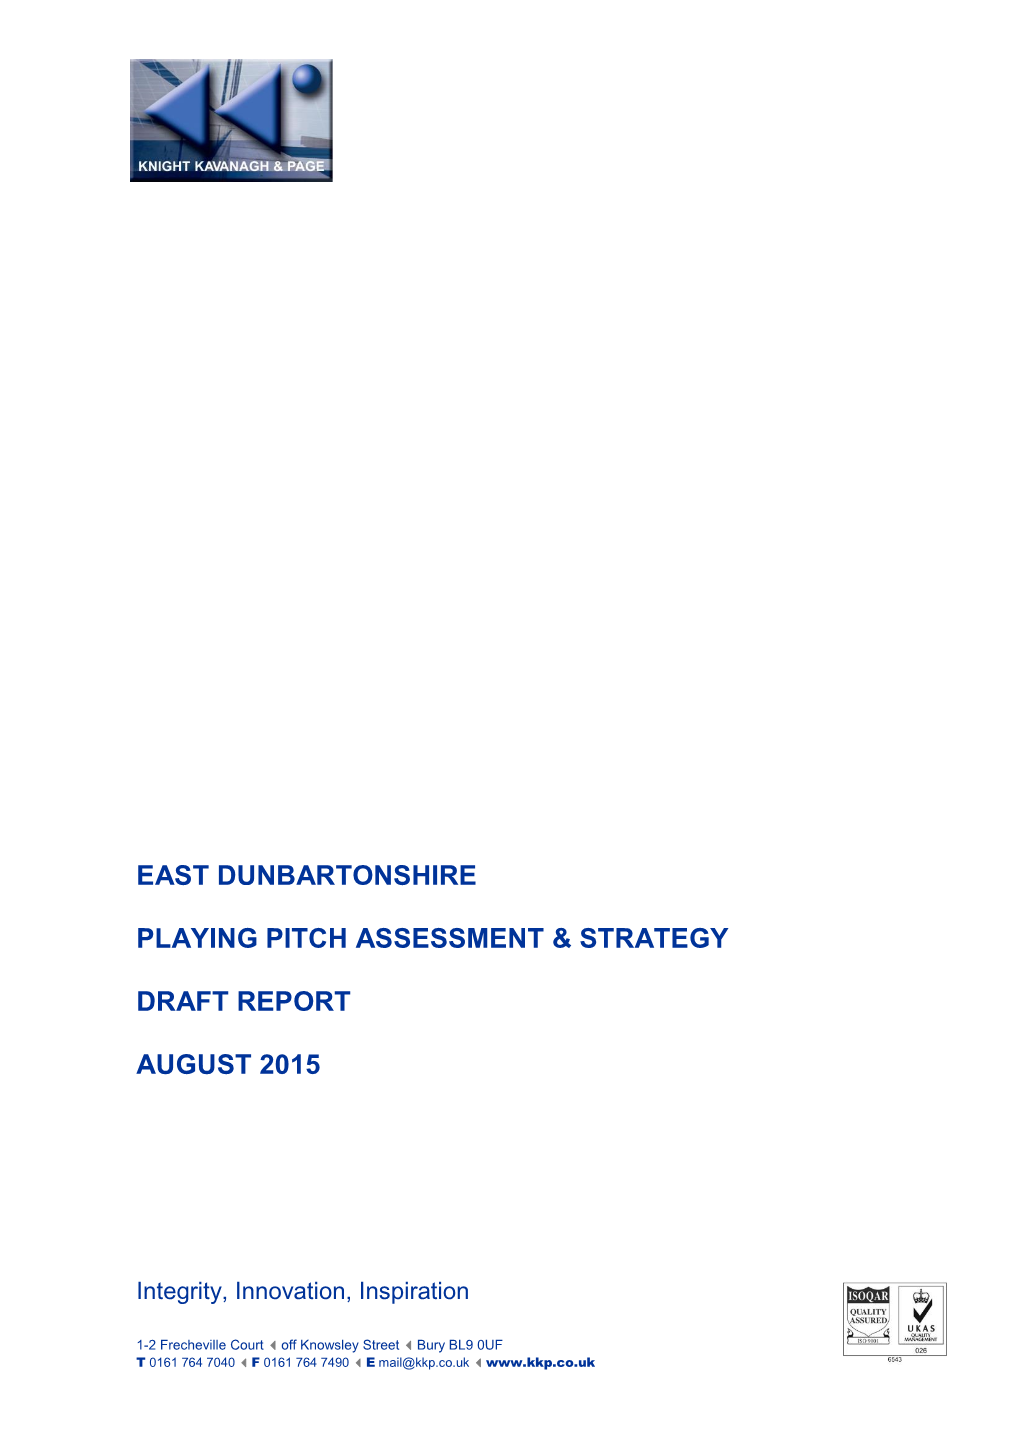 East Dunbartonshire Playing Pitch Assessment & Strategy Draft Report